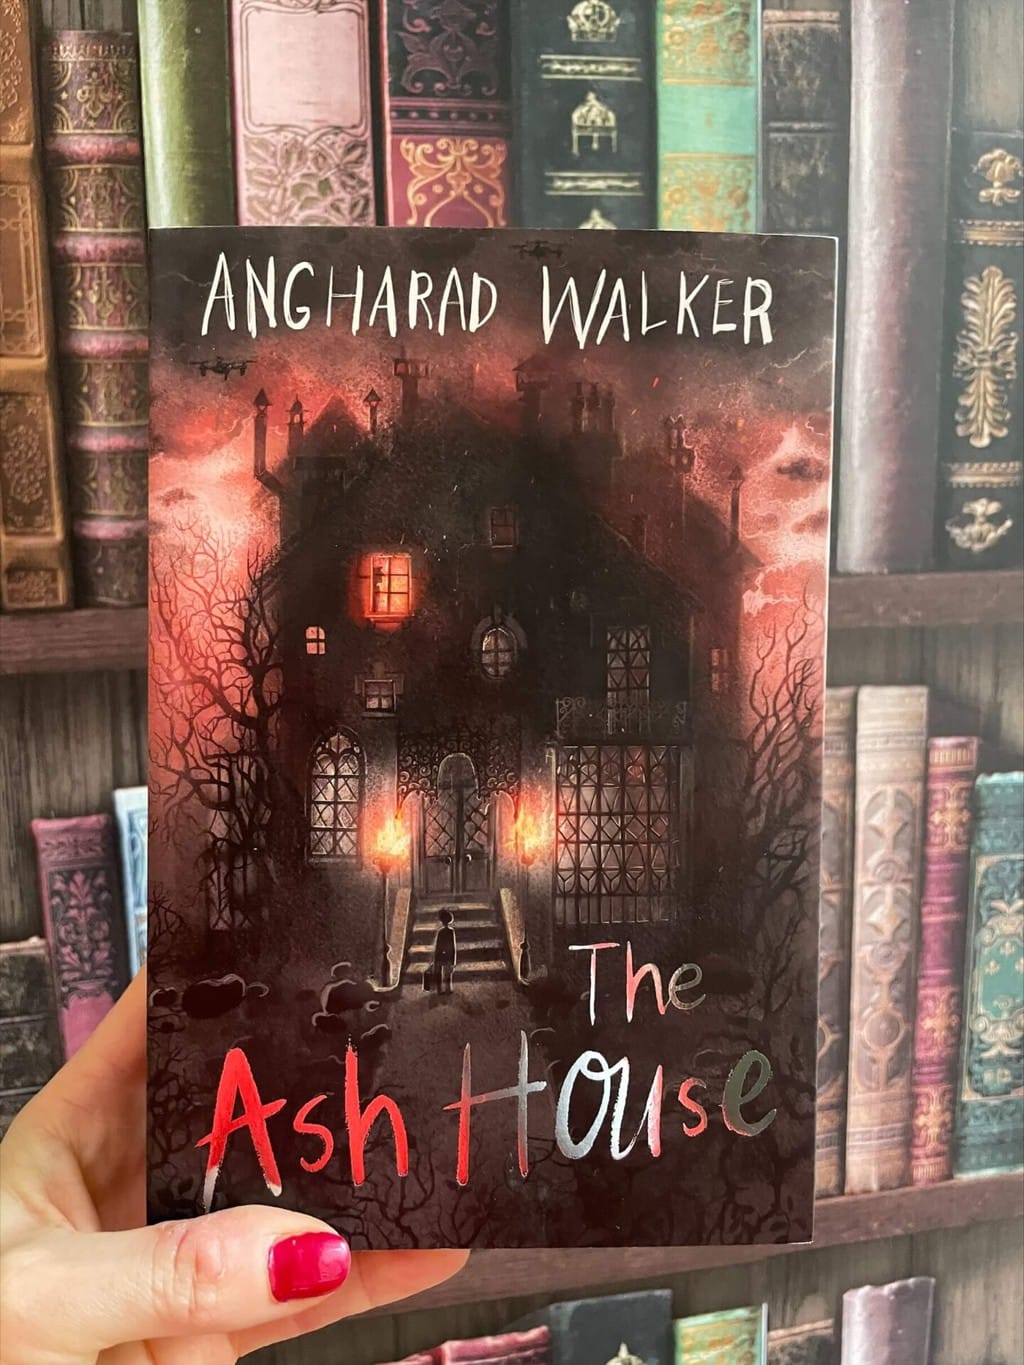 Ash House – Anghard Walker (author), Olia Murza (illustrator) – Chicken House (publisher), recommended reading age: 10-14 years